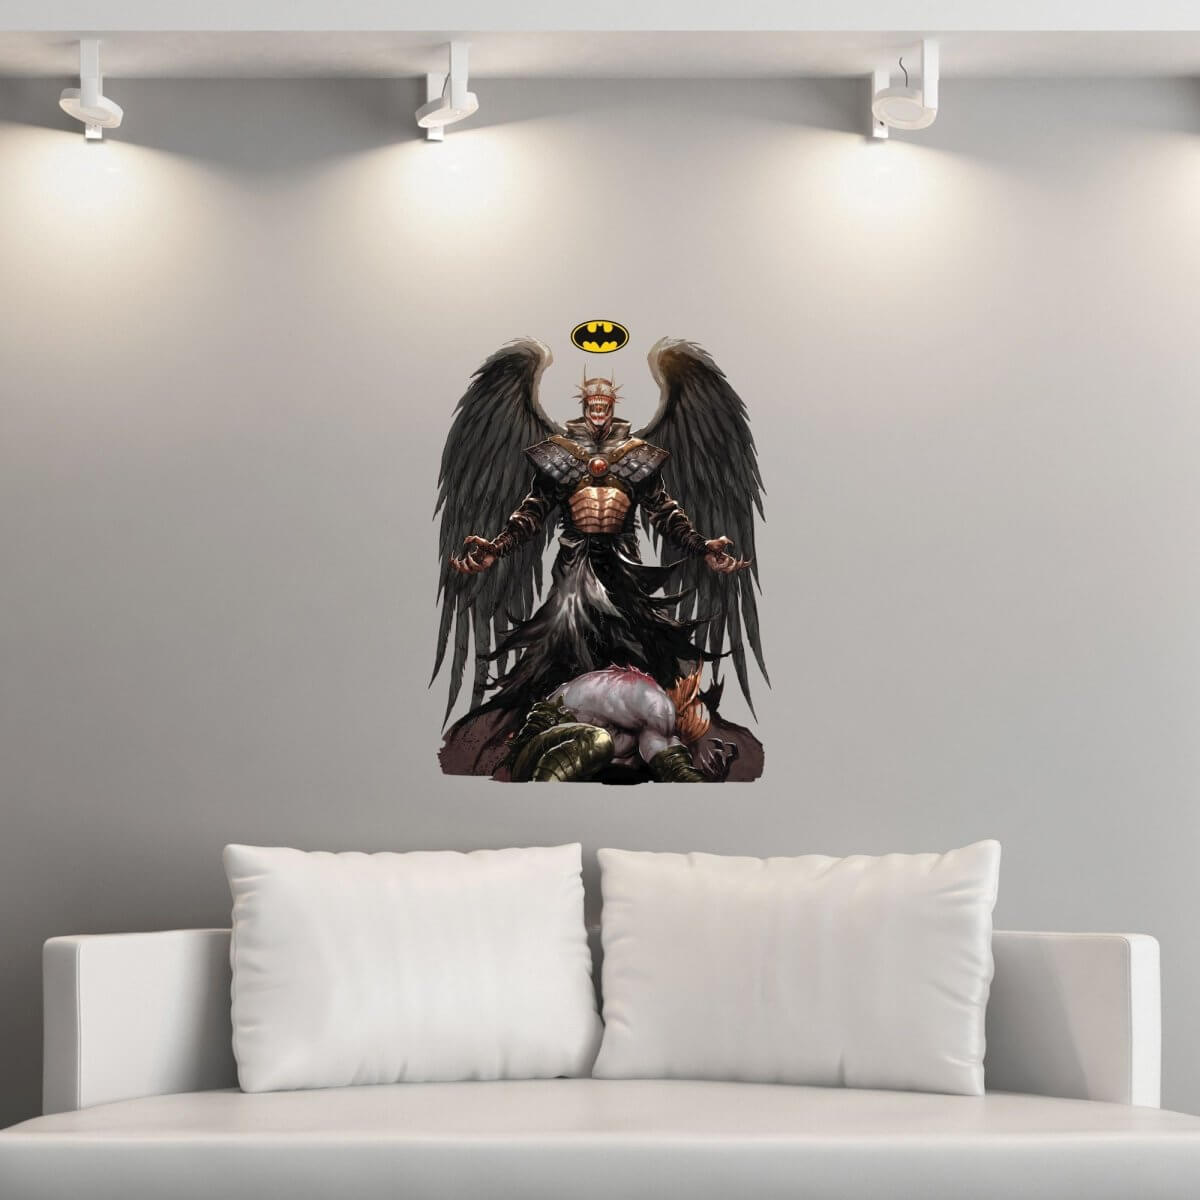 Kismet Decals Batman Who Laughs: Hawkman Comic Cover Series Licensed Wall Sticker - Easy DIY Home & Room Decor Wall Art - Kismet Decals